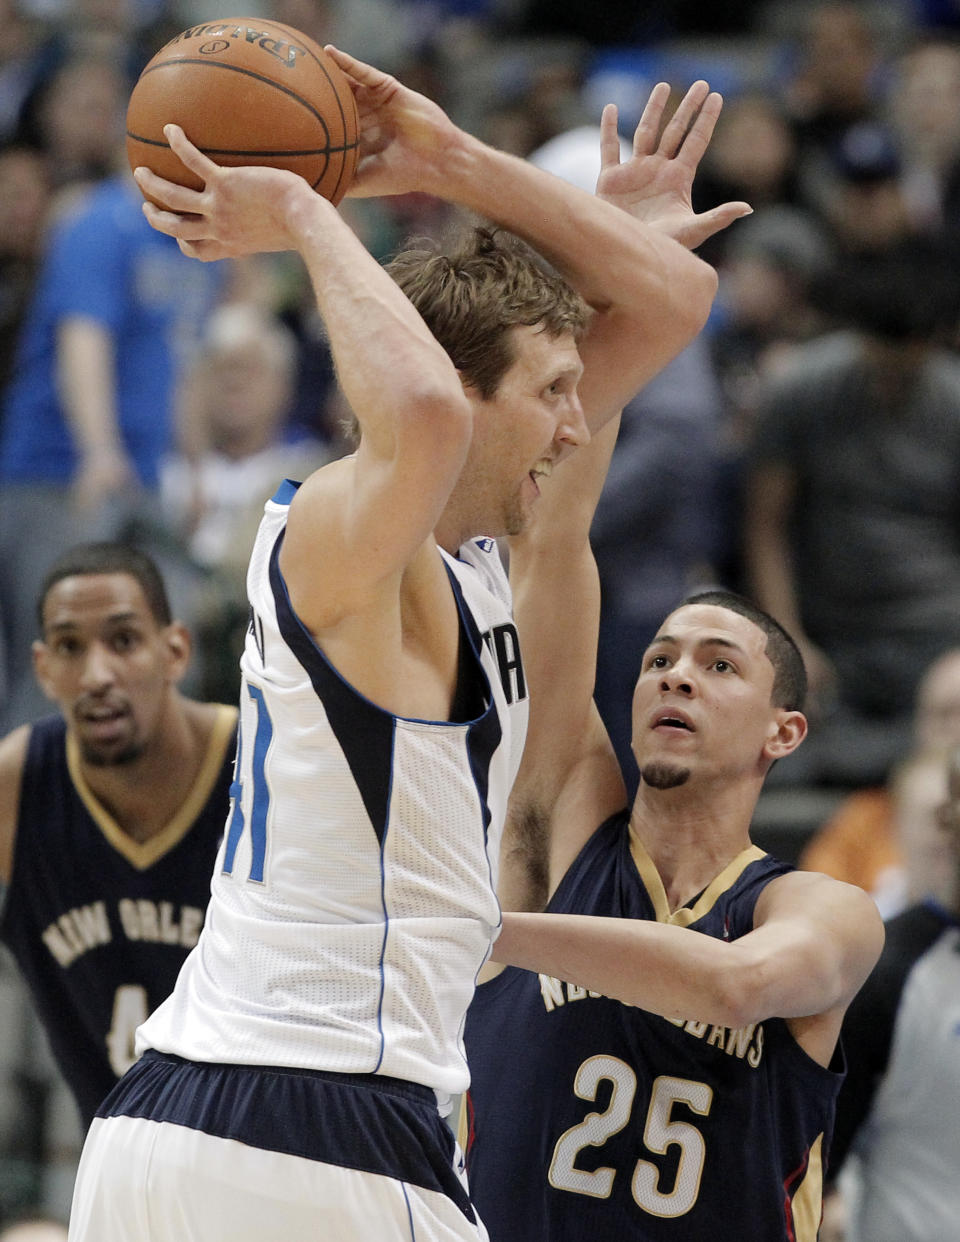 Dallas Mavericks' forward Dirk Nowitzki (41) looks to pass as New Orleans Pelicans' Austin Rivers (25) defends during the first half of an NBA basketball game on Wednesday, Feb. 26, 2014, in Dallas. (AP Photo/Brandon Wade)